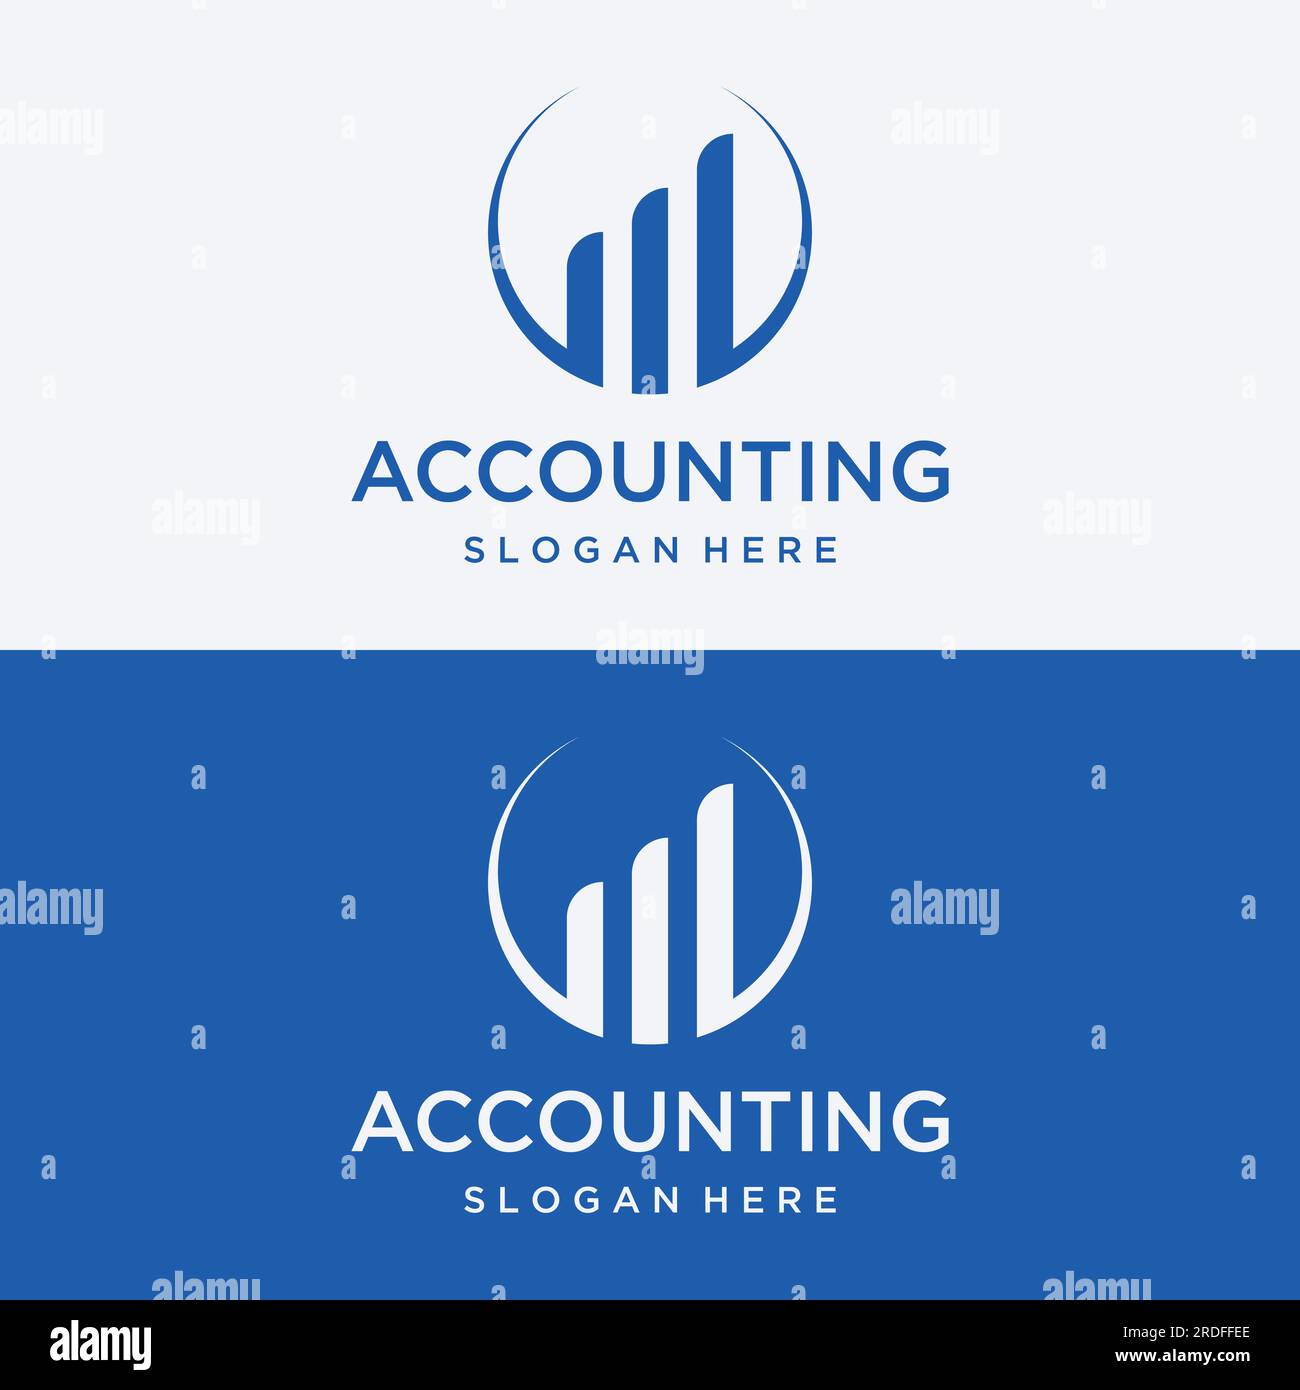 Financial accounting logo, with check mark for financial accounting stock chart analysis. With modern vector illustration concept. Stock Vector